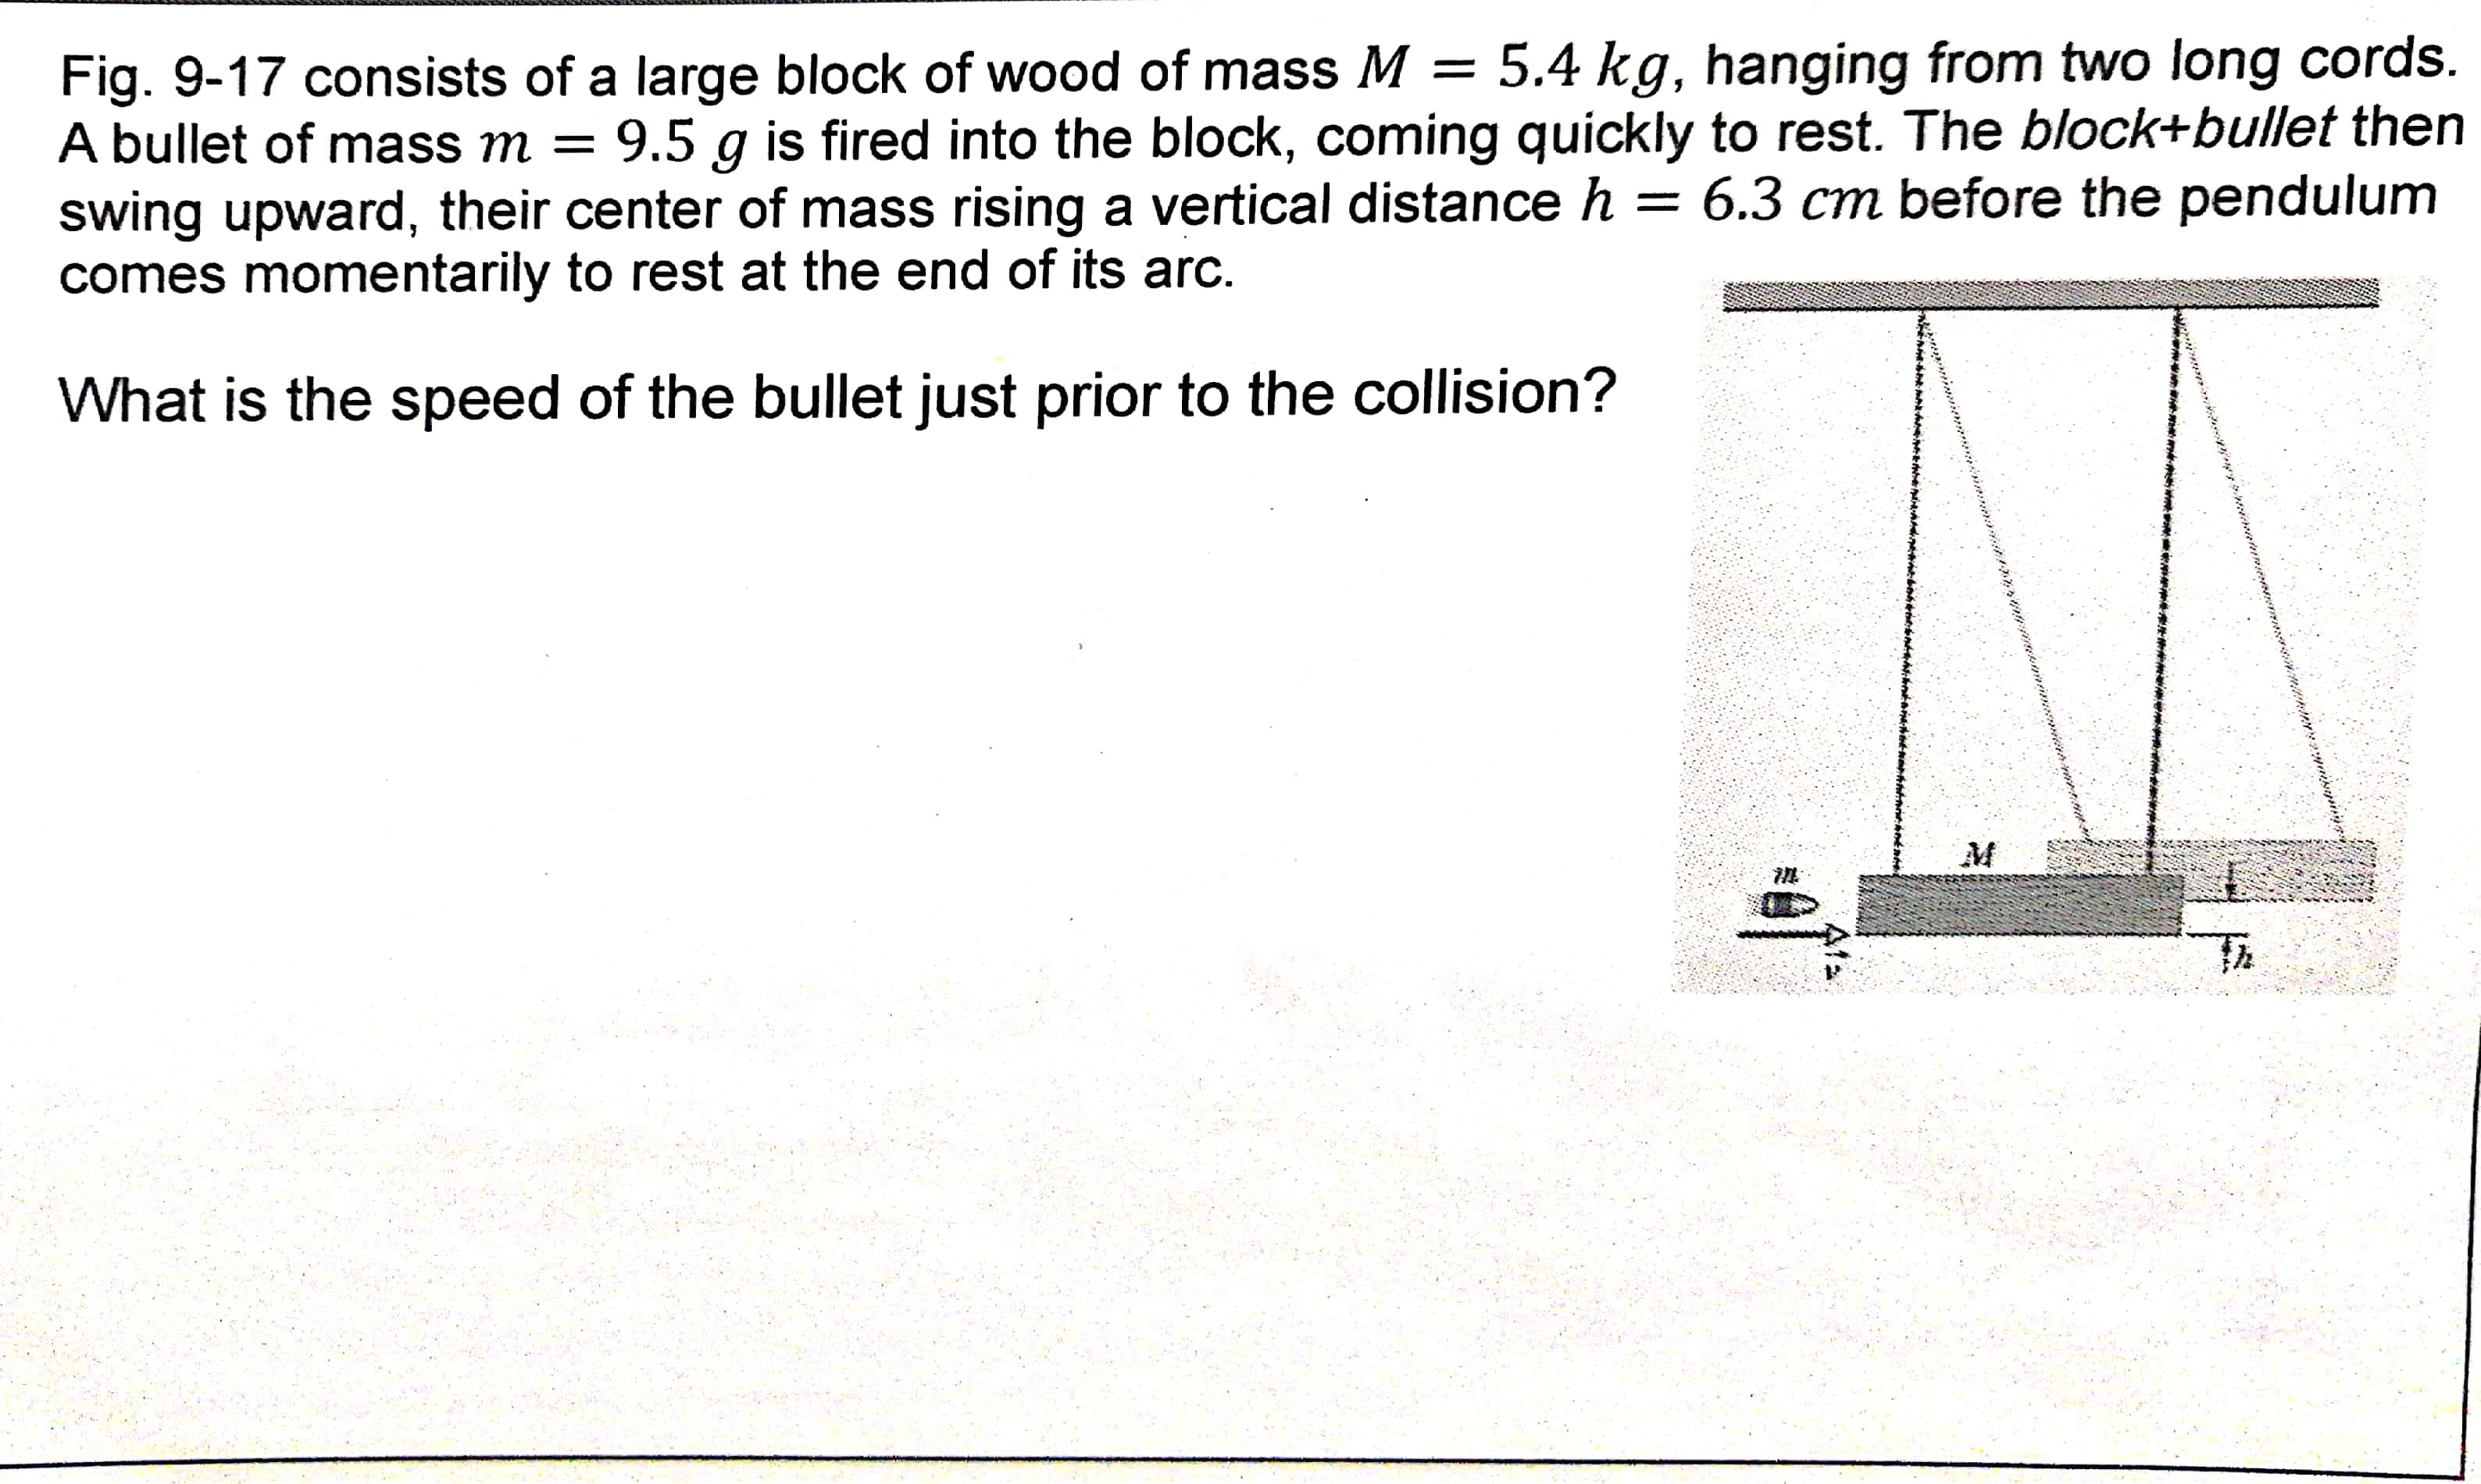 Fig. 9-17 consists of a large block of wood of mass M = 5.4 kg, hanging from two long cords.
A bullet of mass m = 9.5 g is fired into the block, coming quickly to rest. The block+bullet then
swing upward, their center of mass rising a vertical distance h = 6.3 cm before the pendulum
comes momentarily to rest at the end of its arc.
What is the speed of the bullet just prior to the collision?
